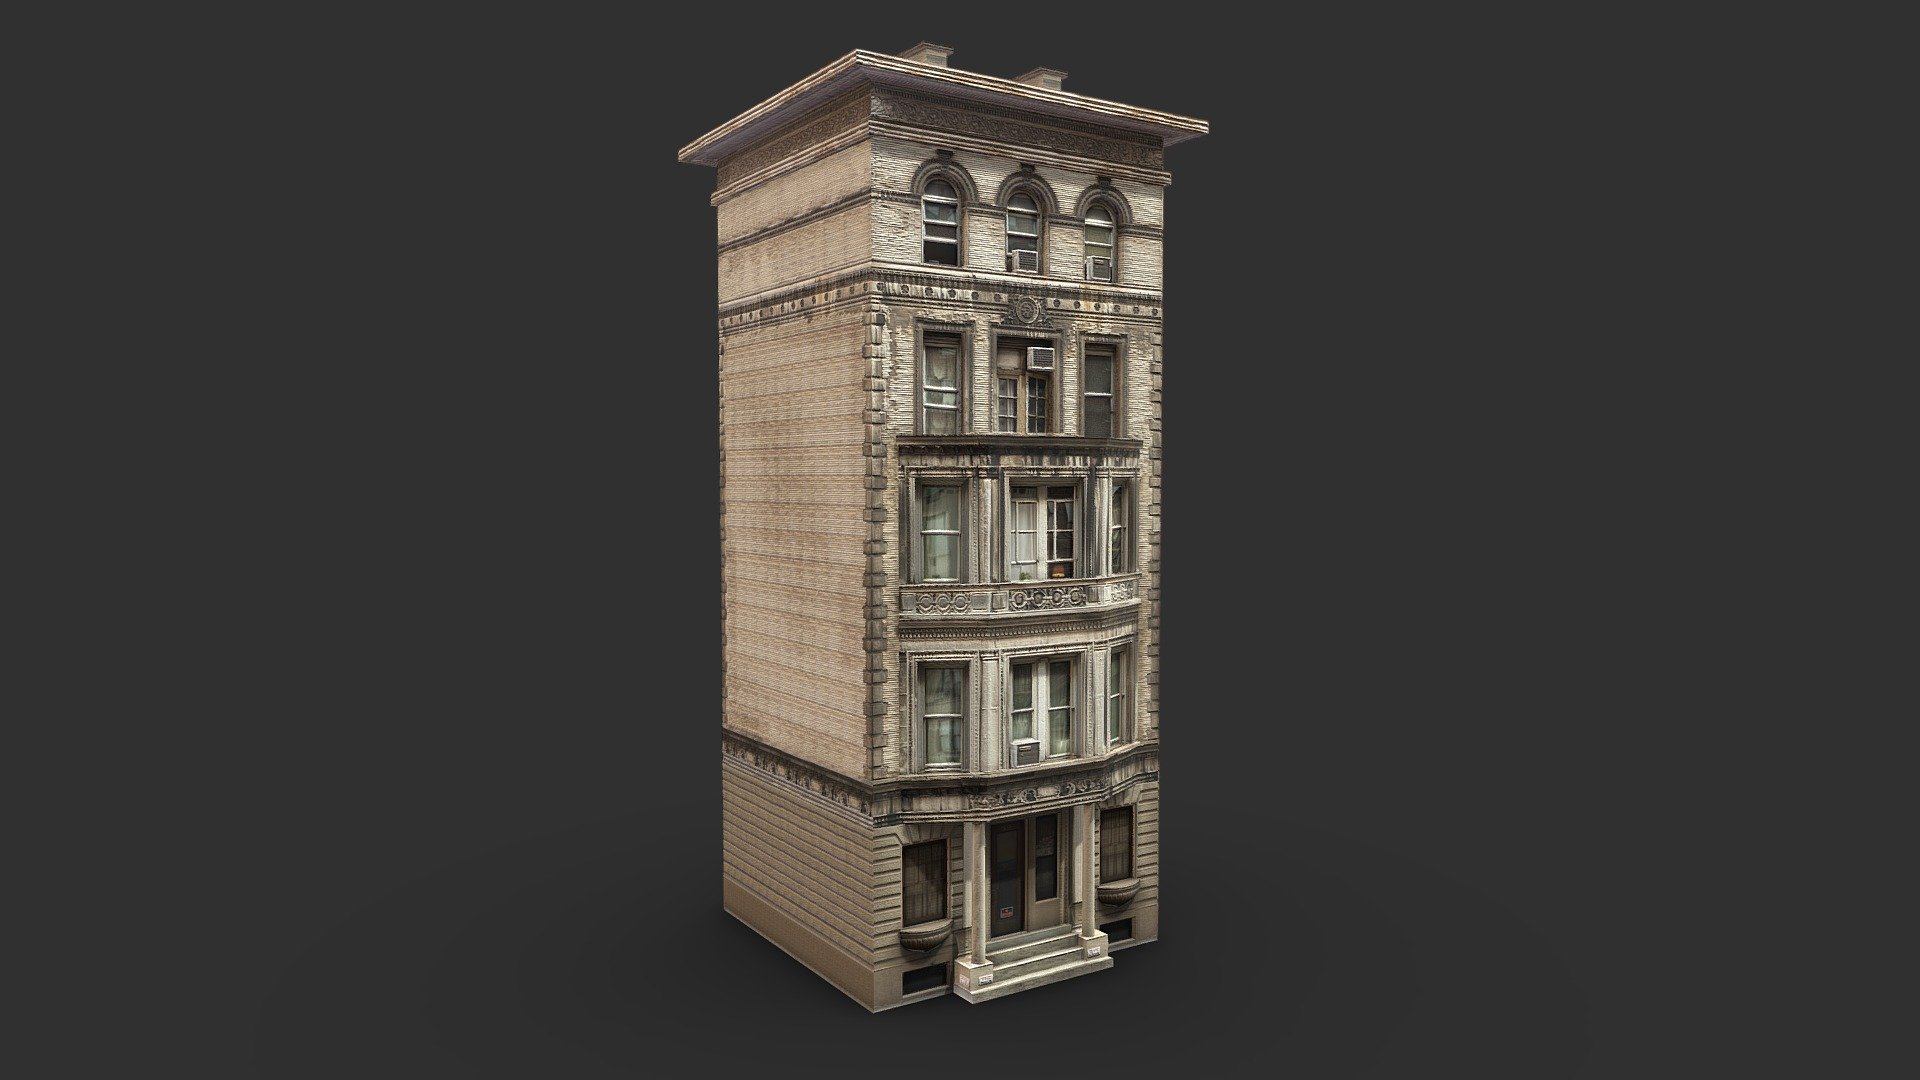 3D model of Old Apartment House

Resolution of textures:  1197x3000x2 1600x1053 (roof)
Originally created with 3ds Max 2017
Photorealistic Texture
Unit system is set to centimetre.
Model is built to real-world scale
Rendered in Vray and 

Special notes:
.fbx format is recommended for import in other 3d software. If your software doesn't support .fbx format, please use .3ds format; .obj, format was exported from 3ds Max 3d model